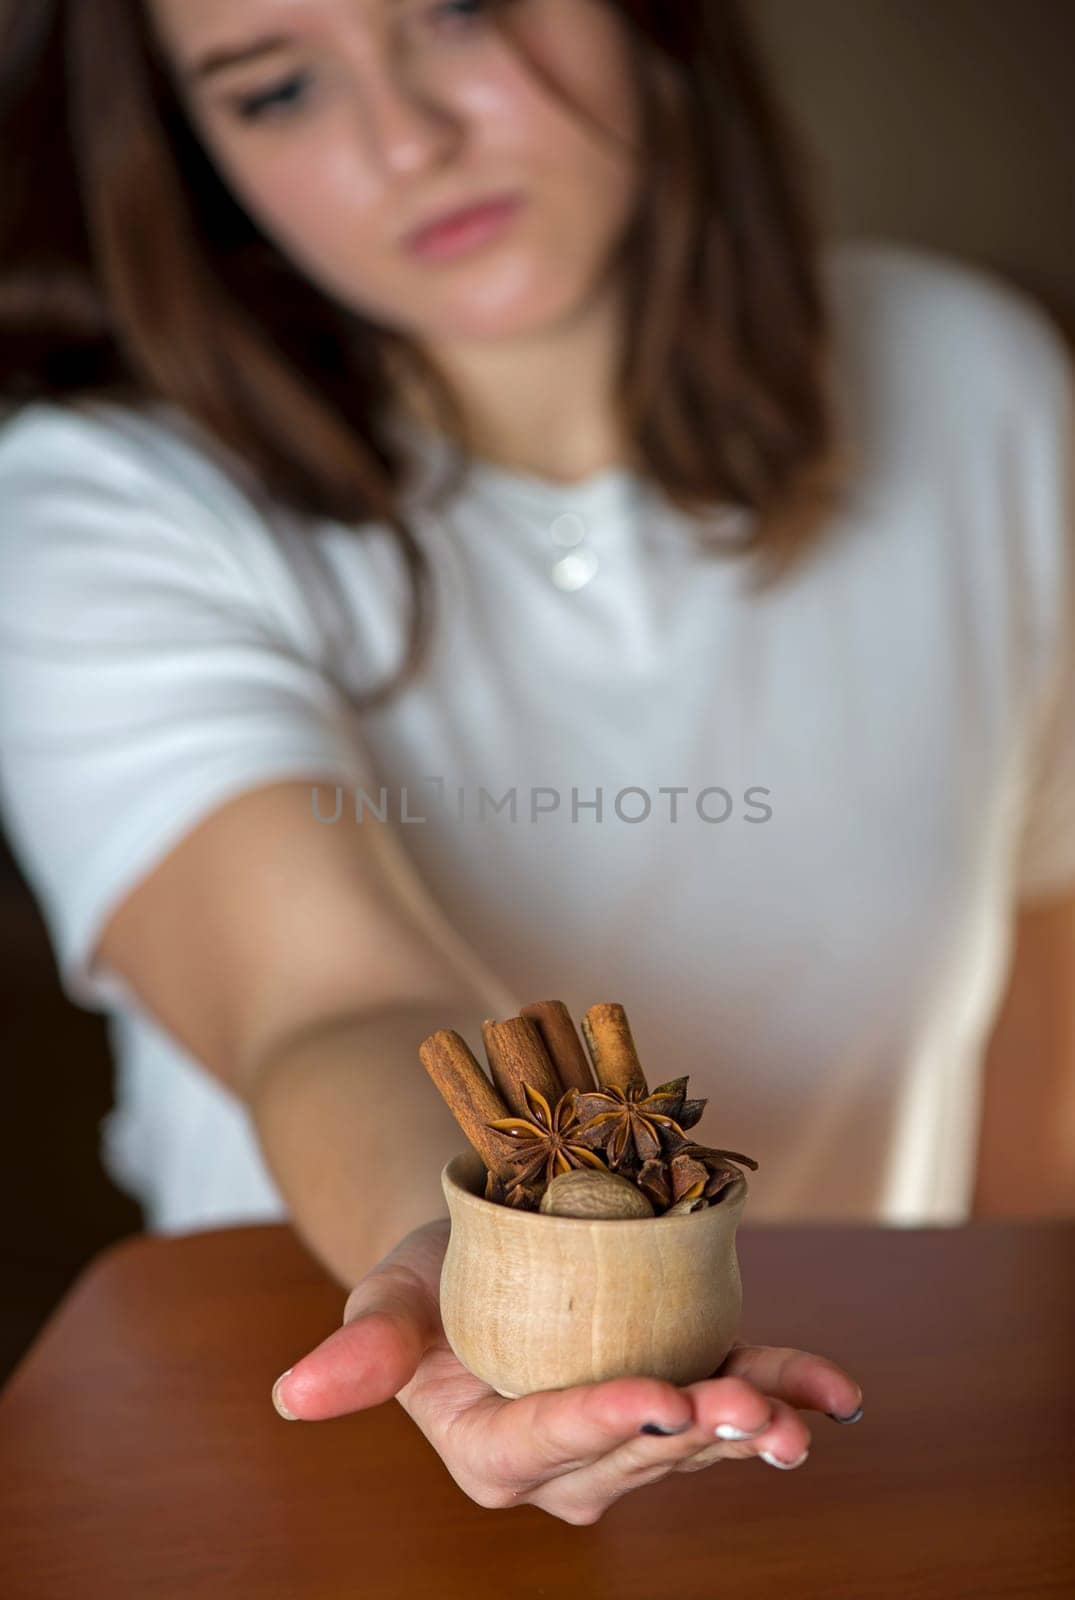 A girl shows a cup with spices for mulled wine in a kitchen decorated for Christmas by aprilphoto